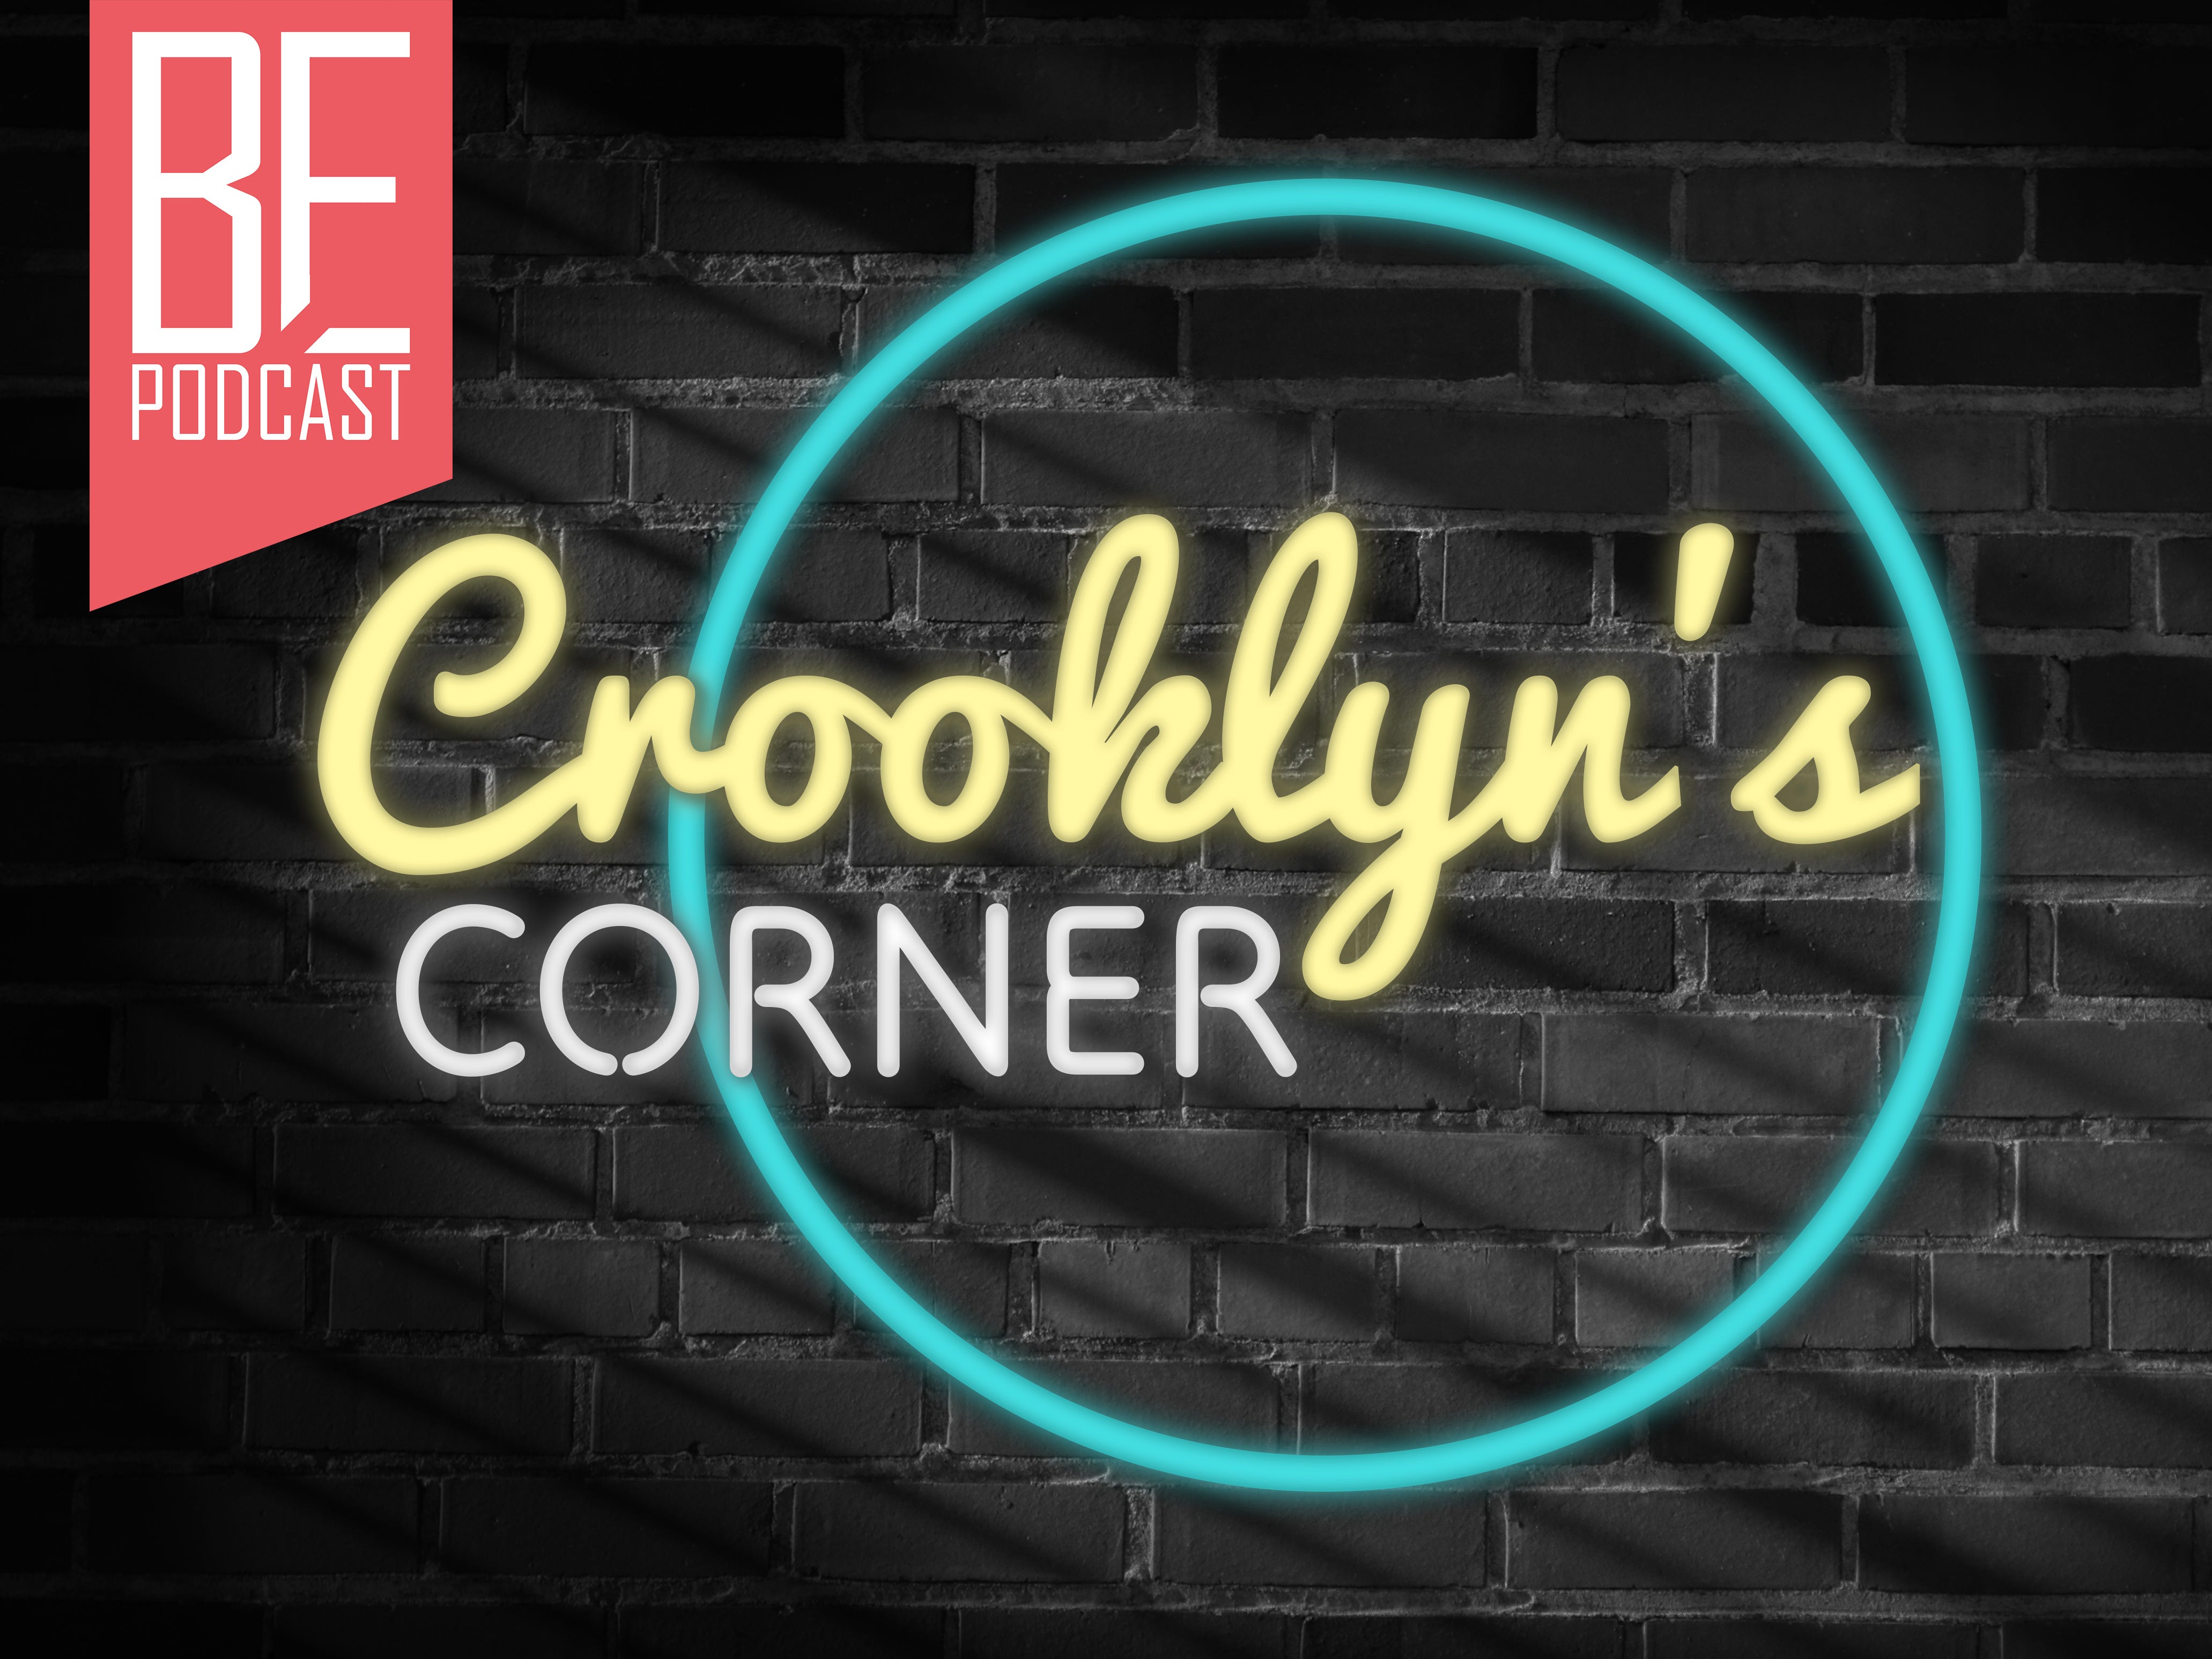 mma, ufc, mixed martial arts, mma podcast, ufc podcast, ufc show, mma show, CrooklynMMA, Stephie Haynes, Crooklyn's Corner, Bloody Elbow, Bloody Elbow Podcast Substack, 